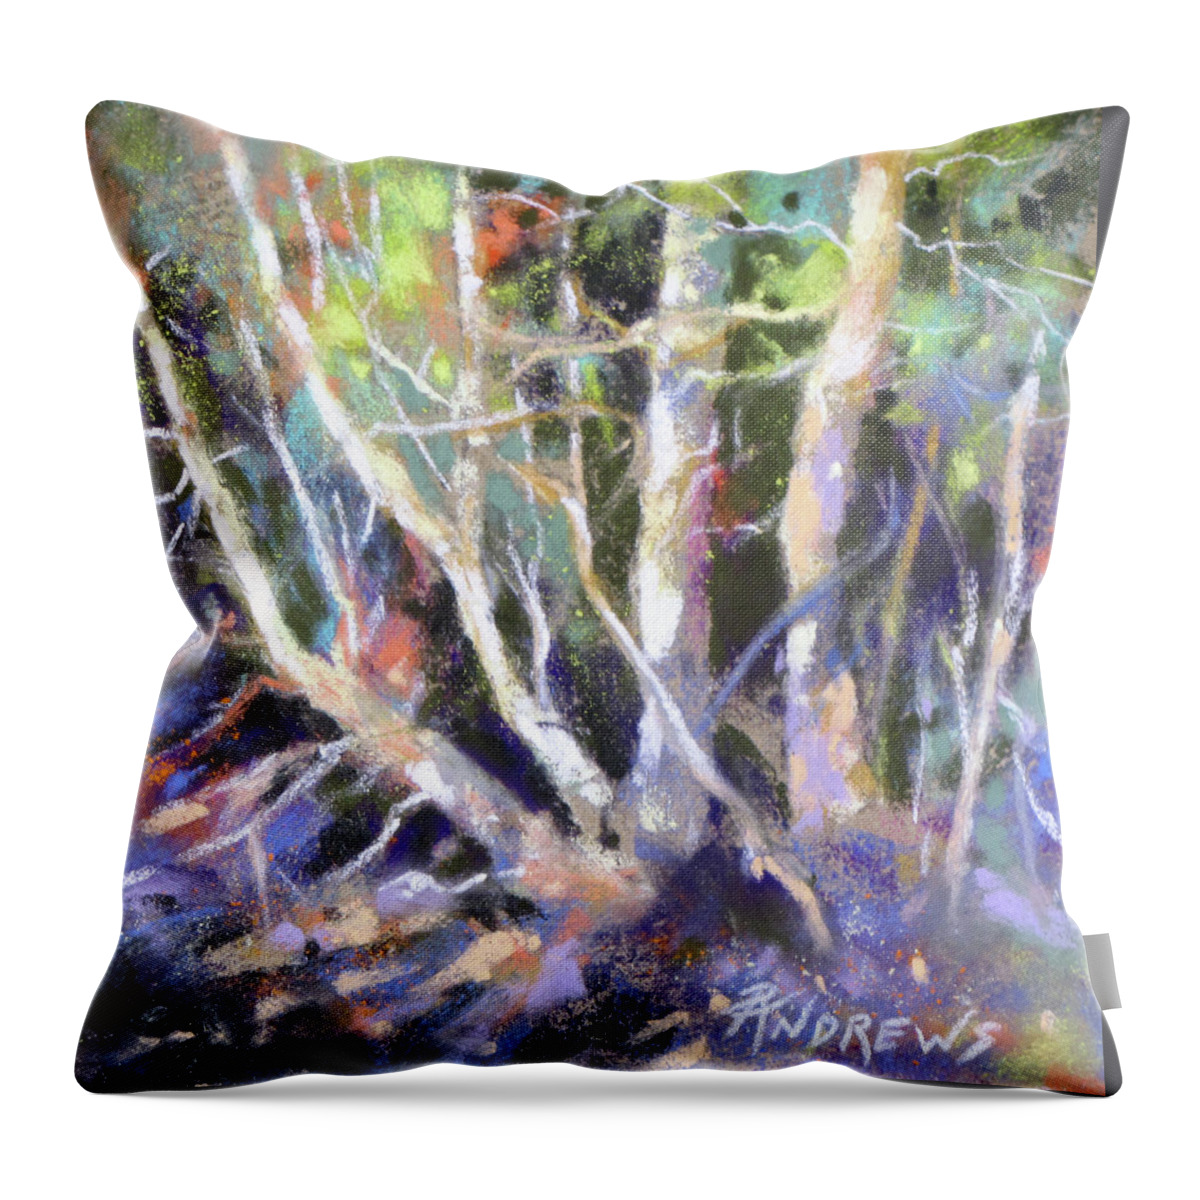 Landscape Throw Pillow featuring the painting Sunny Side by Rae Andrews